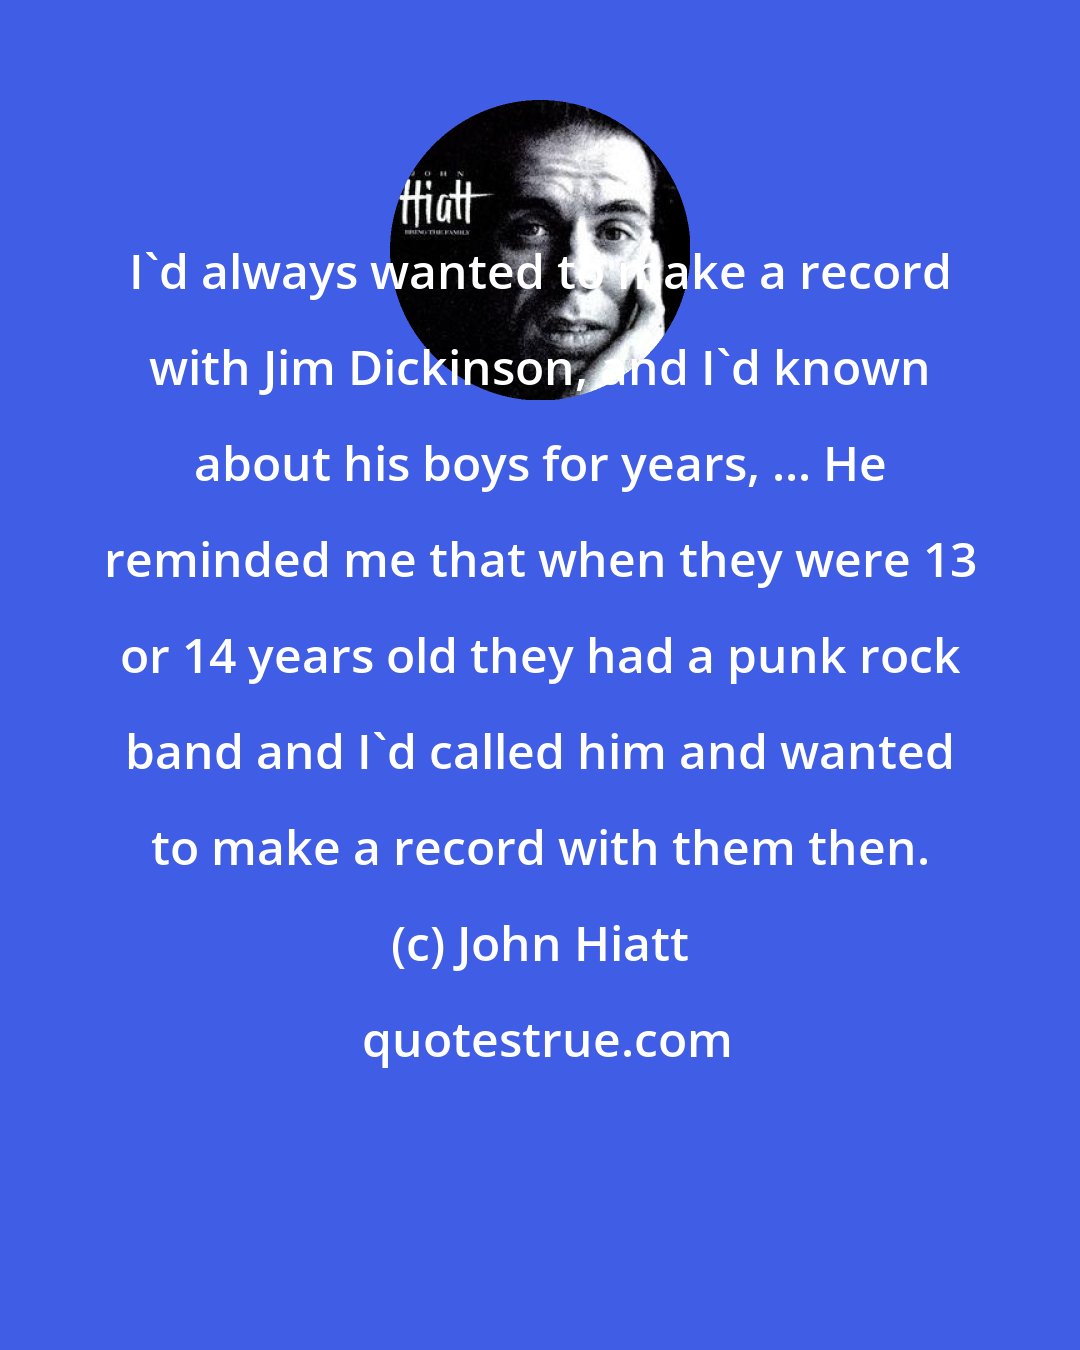 John Hiatt: I'd always wanted to make a record with Jim Dickinson, and I'd known about his boys for years, ... He reminded me that when they were 13 or 14 years old they had a punk rock band and I'd called him and wanted to make a record with them then.